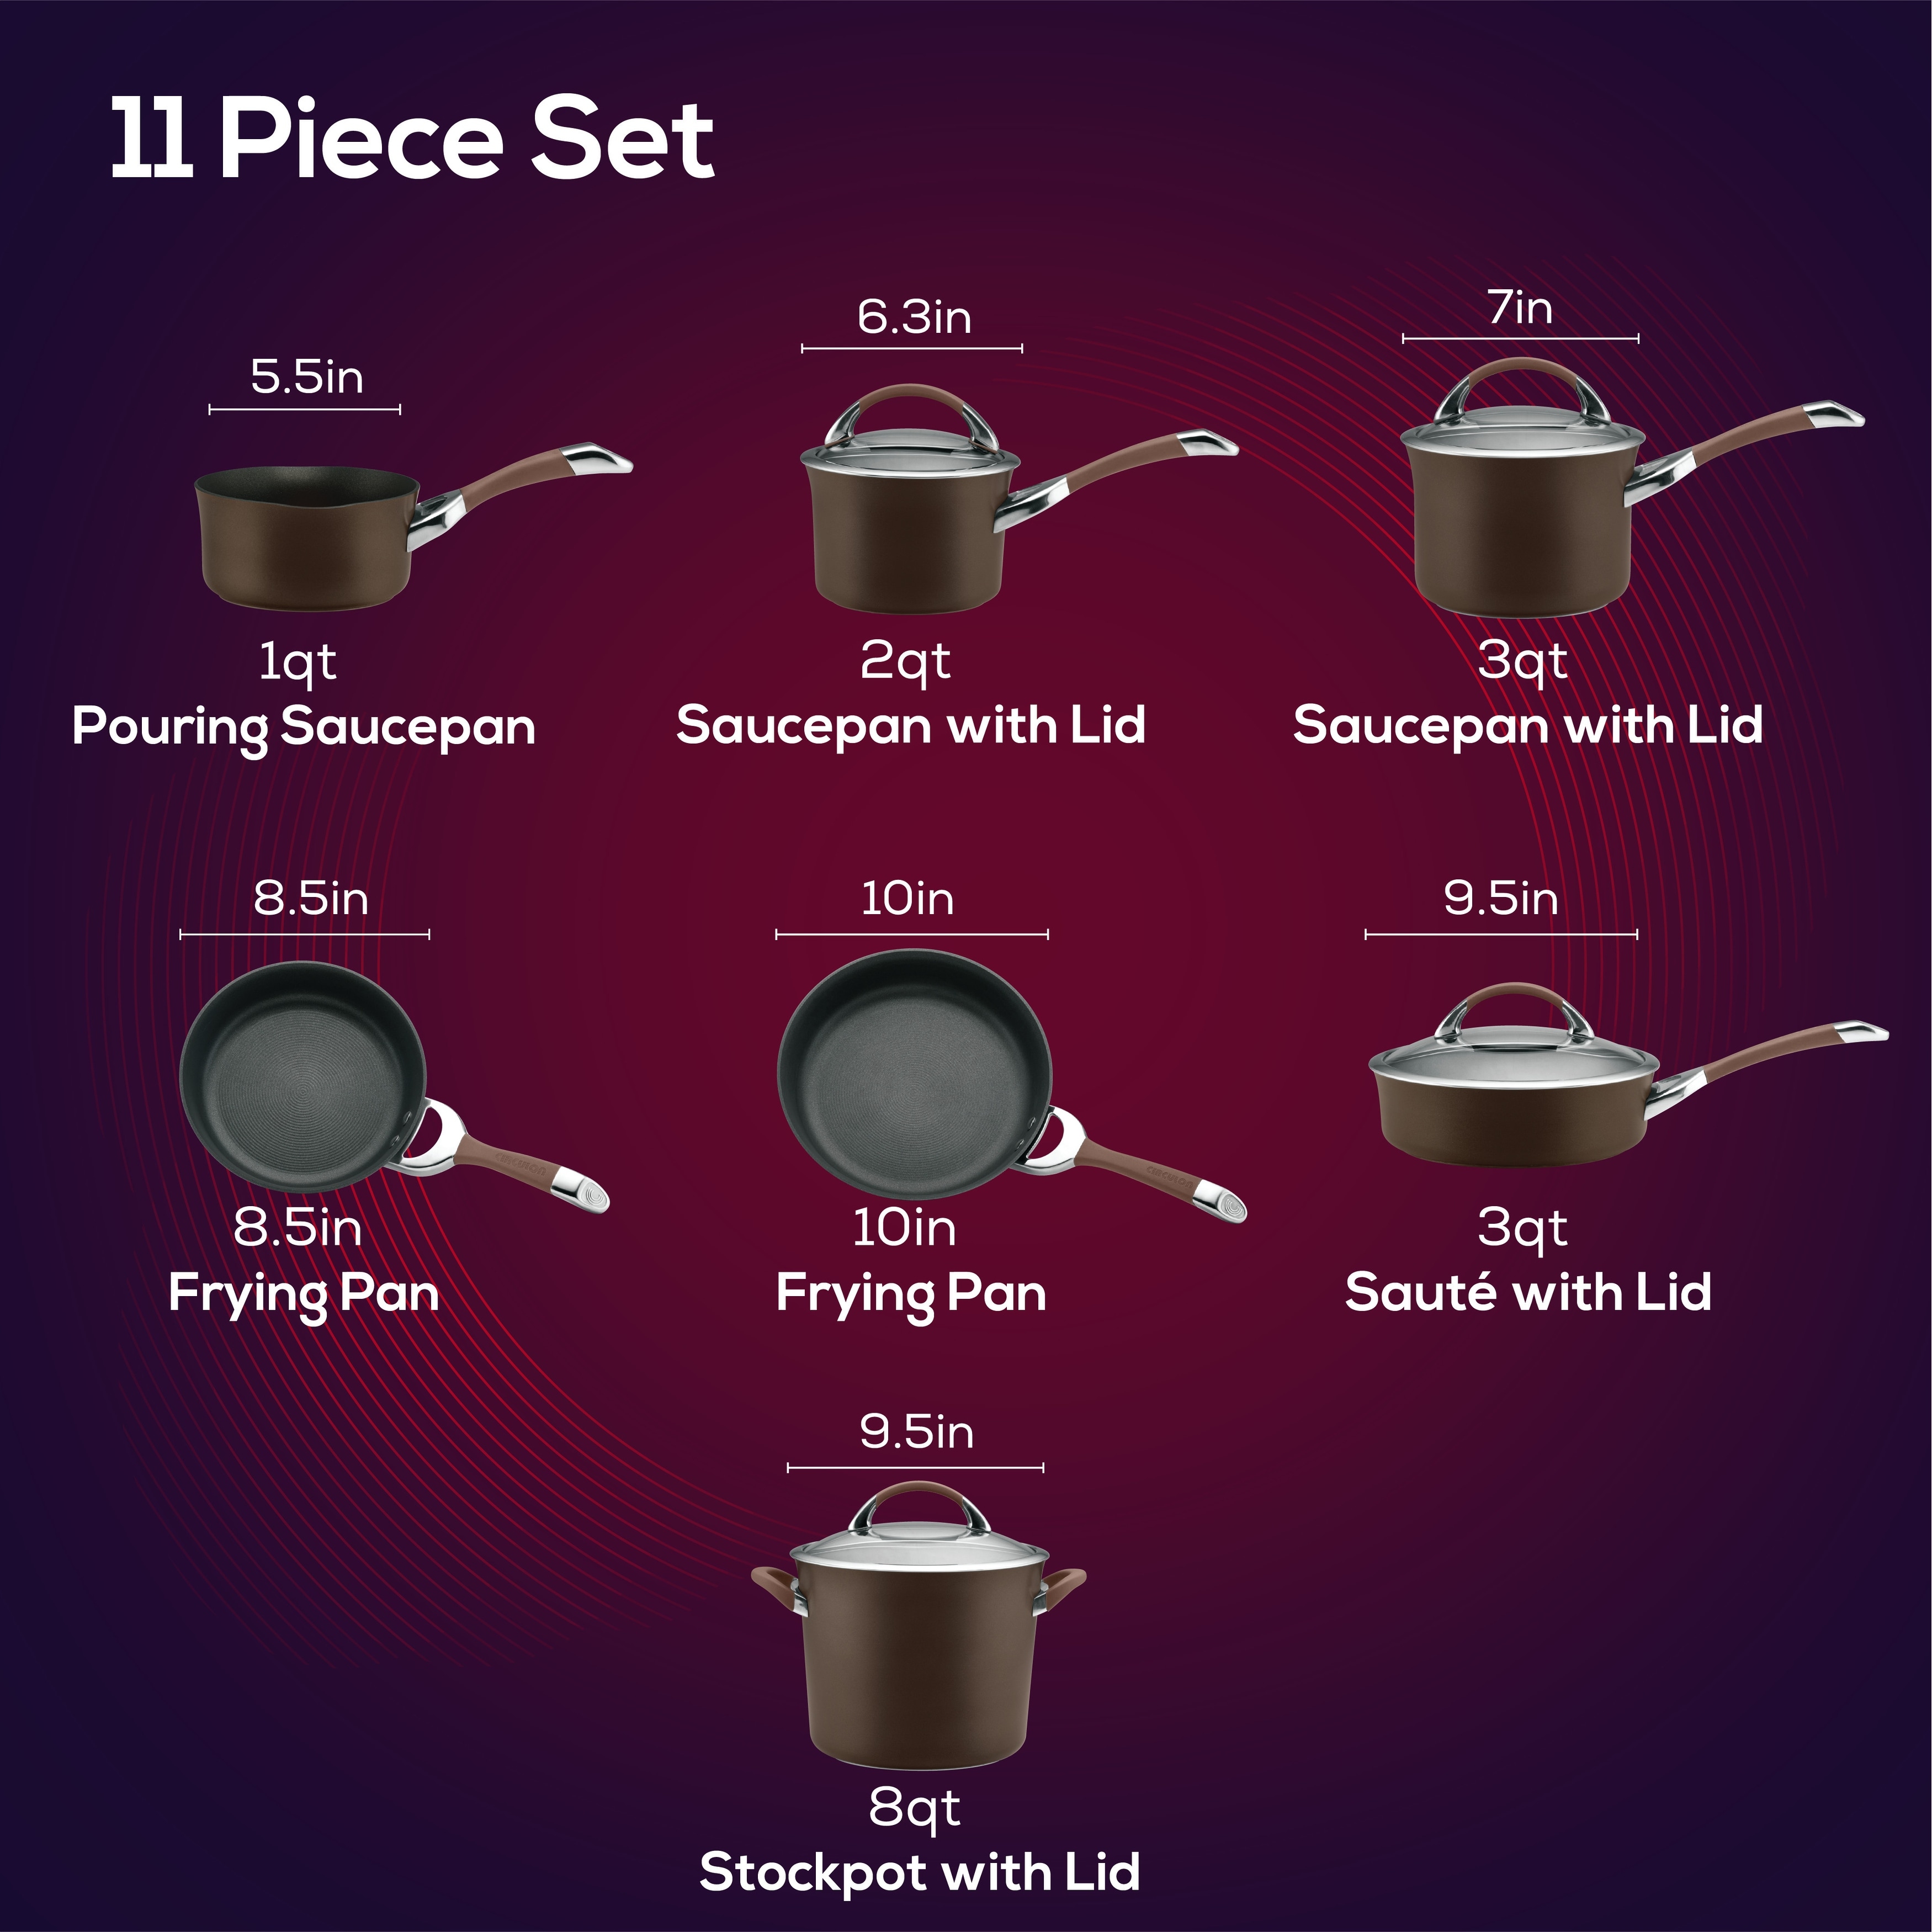 https://ak1.ostkcdn.com/images/products/is/images/direct/5585b270b9ed388cca3fb0094cc98593fd9703f2/Circulon-Symmetry-Hard-Anodized-Nonstick-Cookware-Induction-Pots-and-Pans-Set%2C-11-Piece%2C-Chocolate.jpg